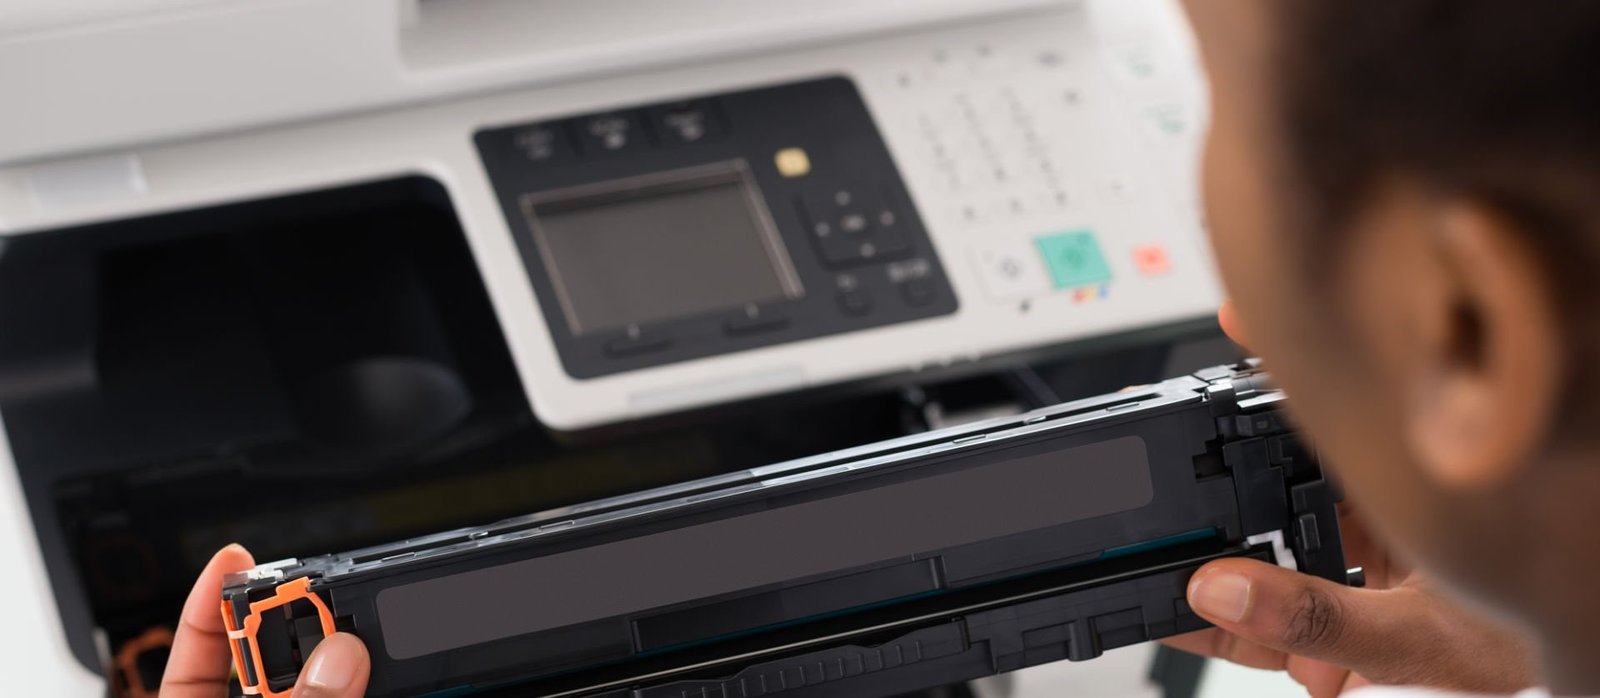 Reasons You Should Upgrade Your Printer